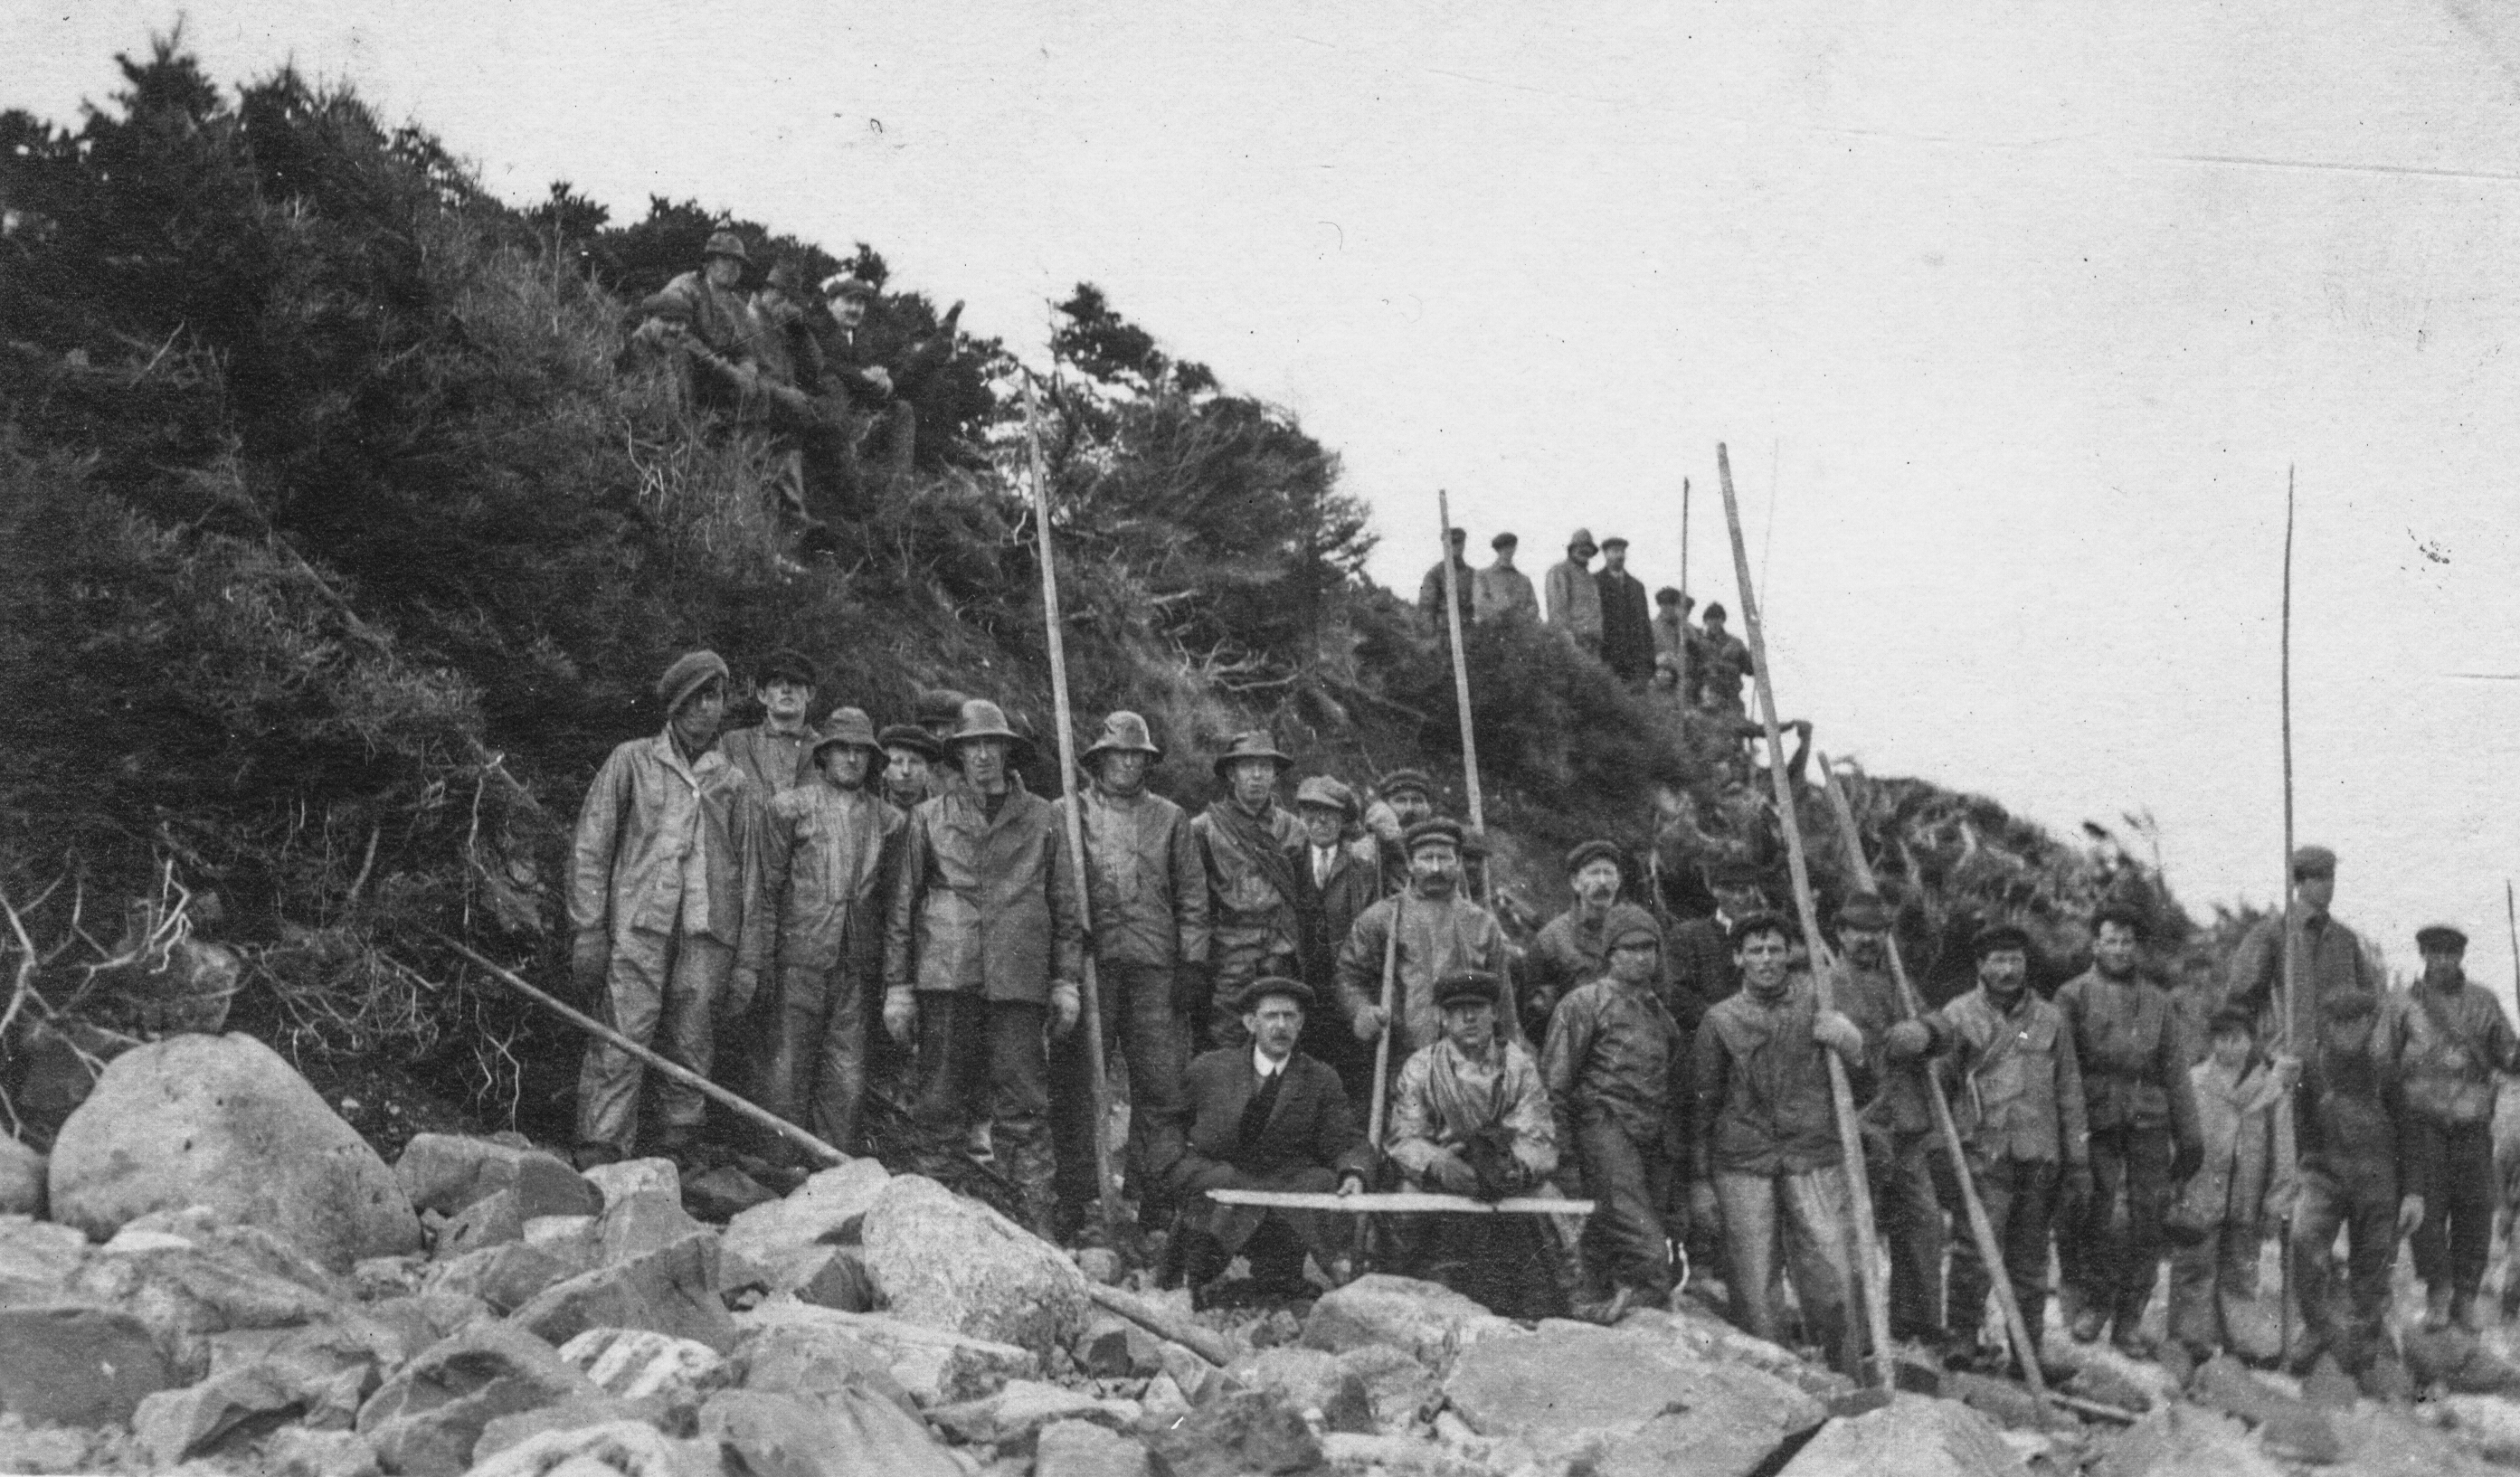 Black and white archival photograph. Group of twenty men on a beach wearing rain gear, caps, and suits holding long poles. On the hill behind the group of men are two groups of men to the left is four men sitting on the hill, and to the right is seven men standing up.